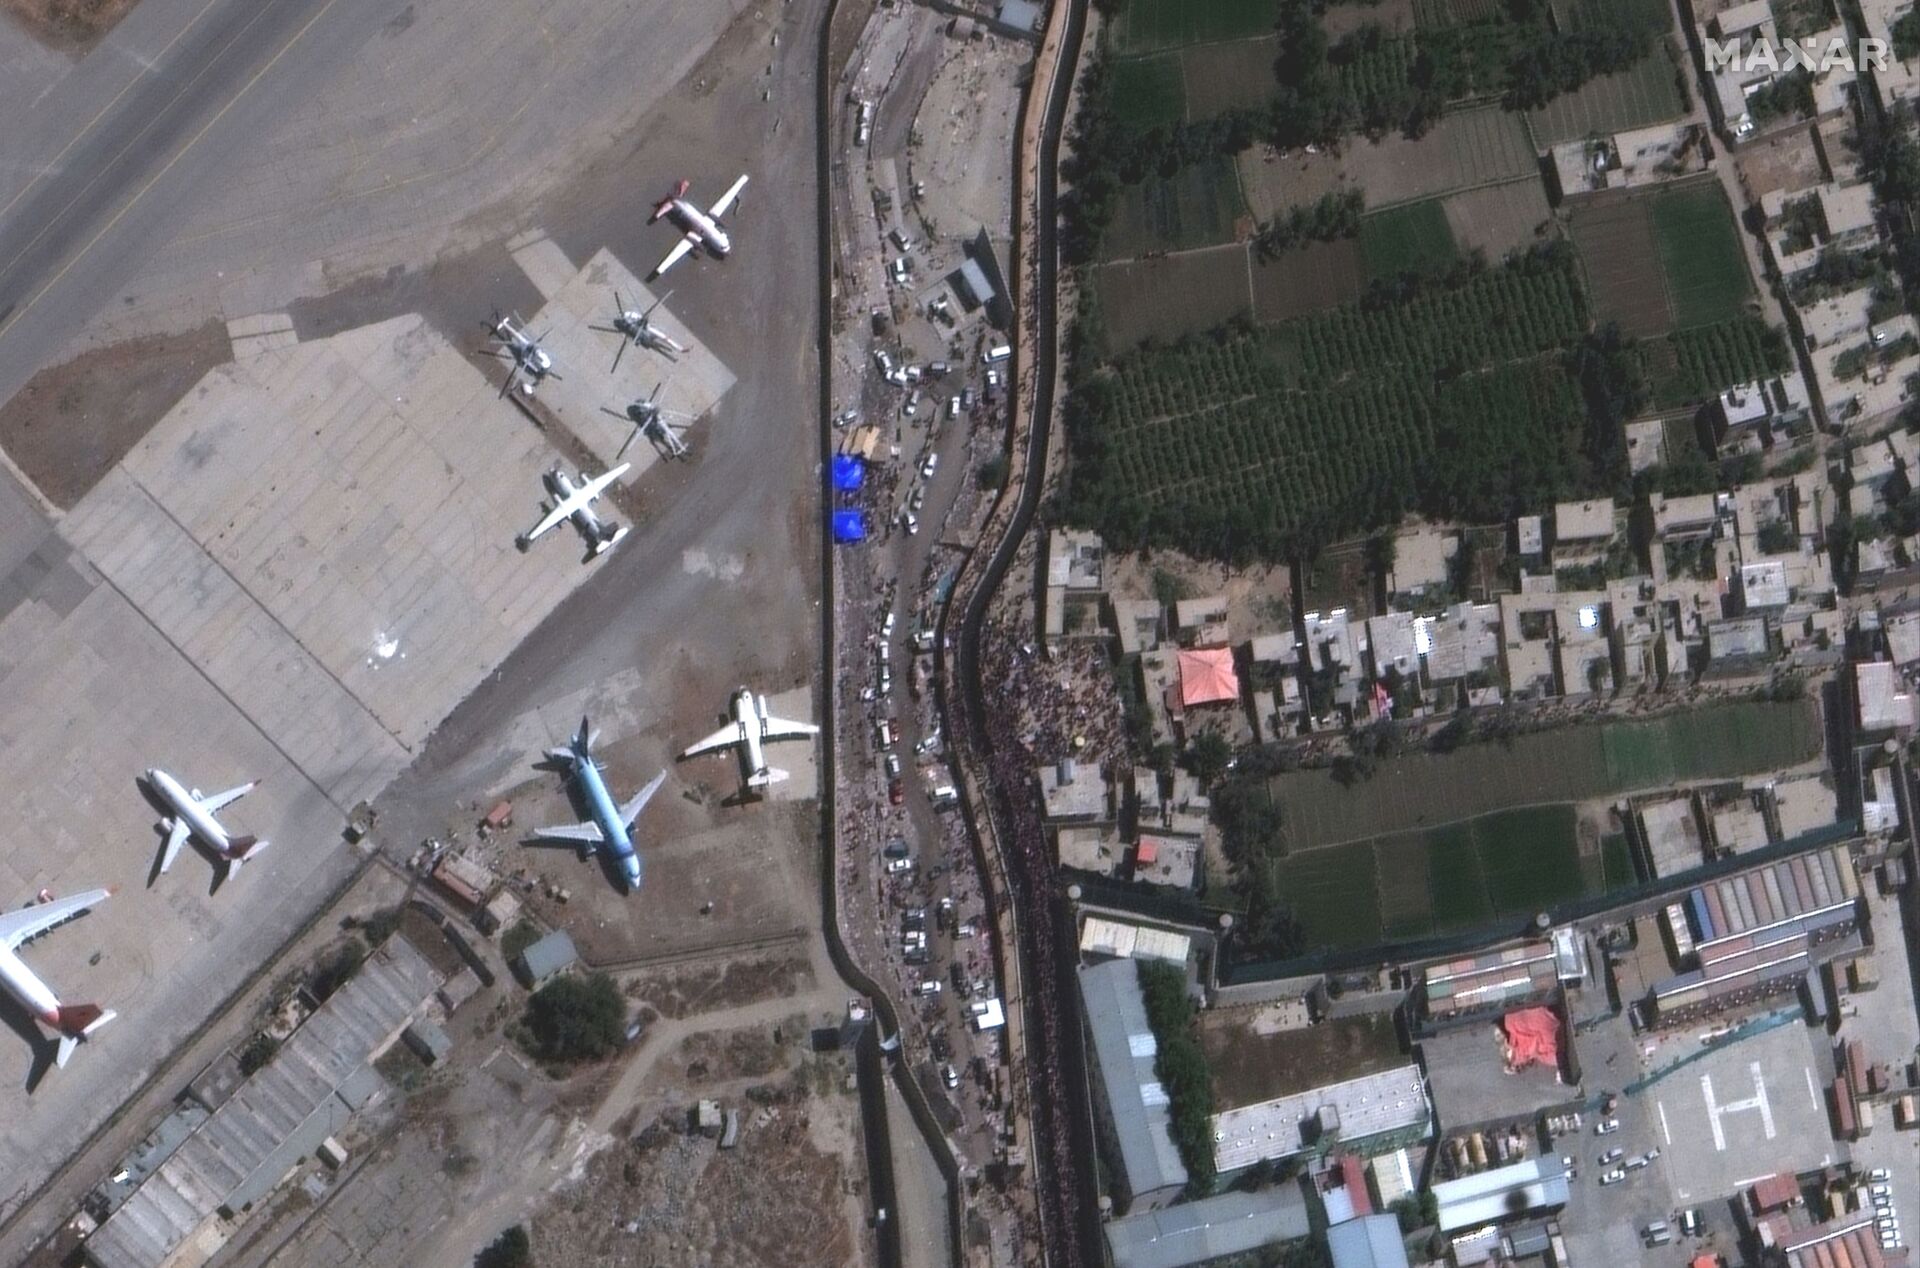 An overview of crowds at the Abbey Gate at Hamid Karzai International Airport, in Kabul, Afghanistan August 24, 2021, in this satellite image obtained by Reuters on August 26, 2021 - Sputnik International, 1920, 07.09.2021